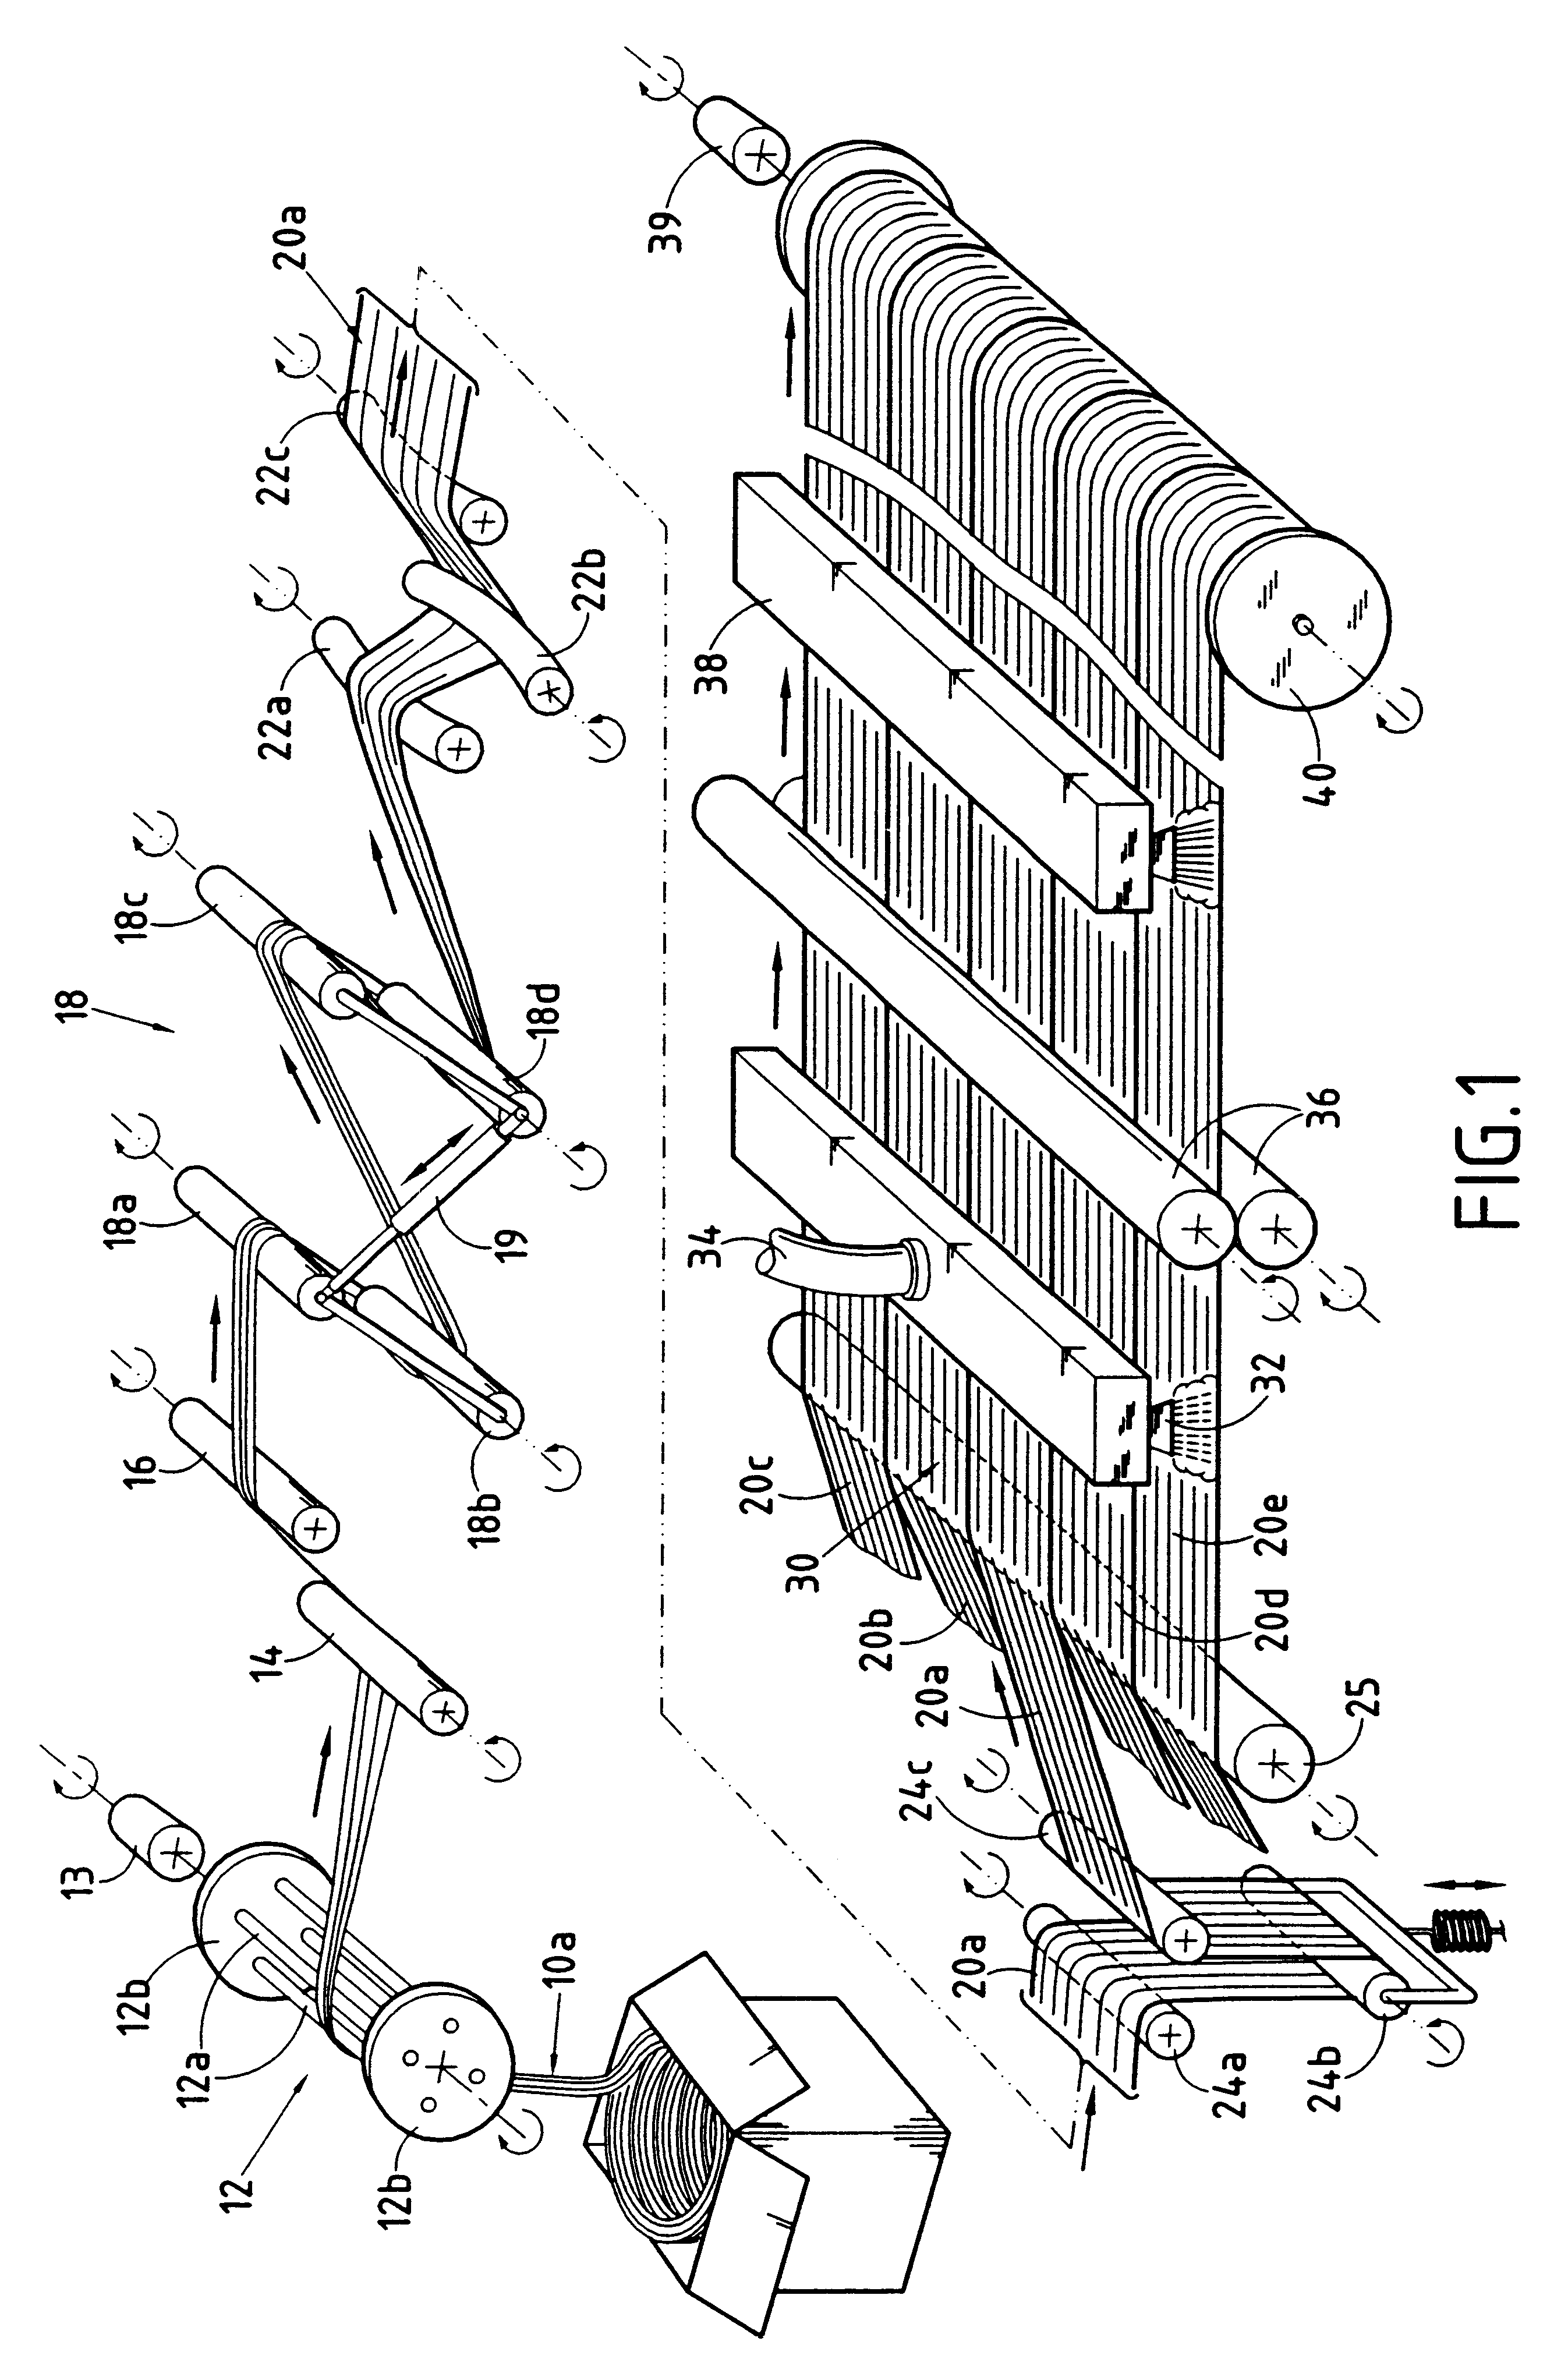 Method and machine for producing multiaxial fibrous webs